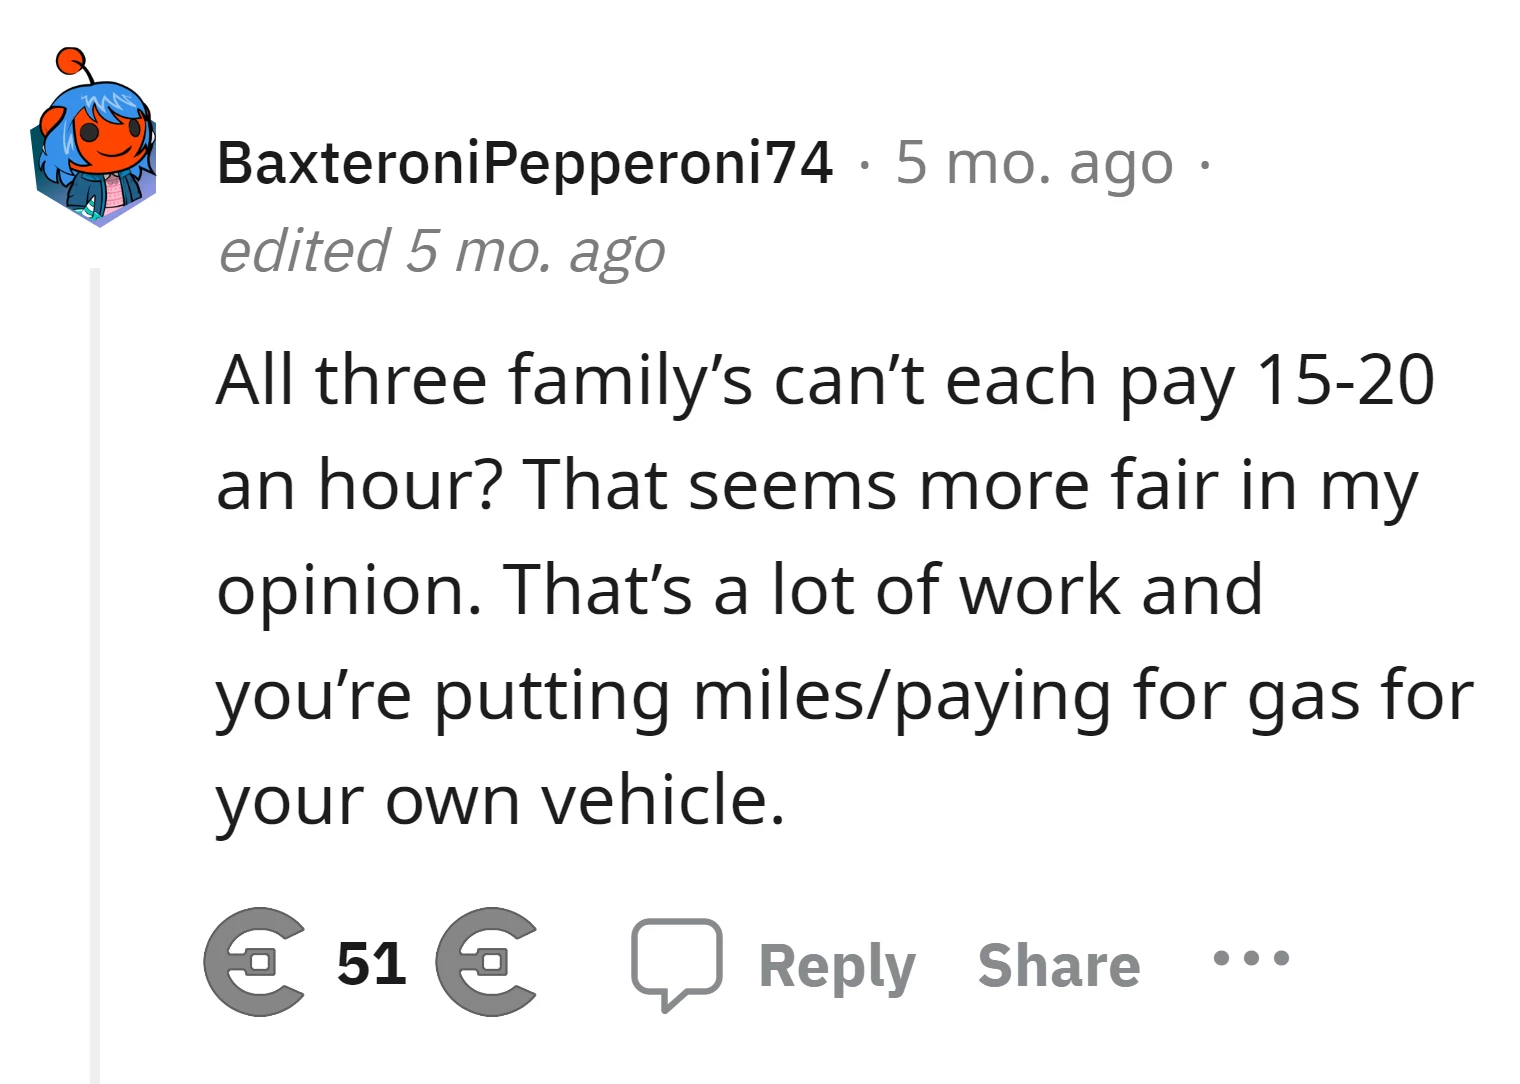 It seems more fair if each of the three families can pay $15-20 per hour